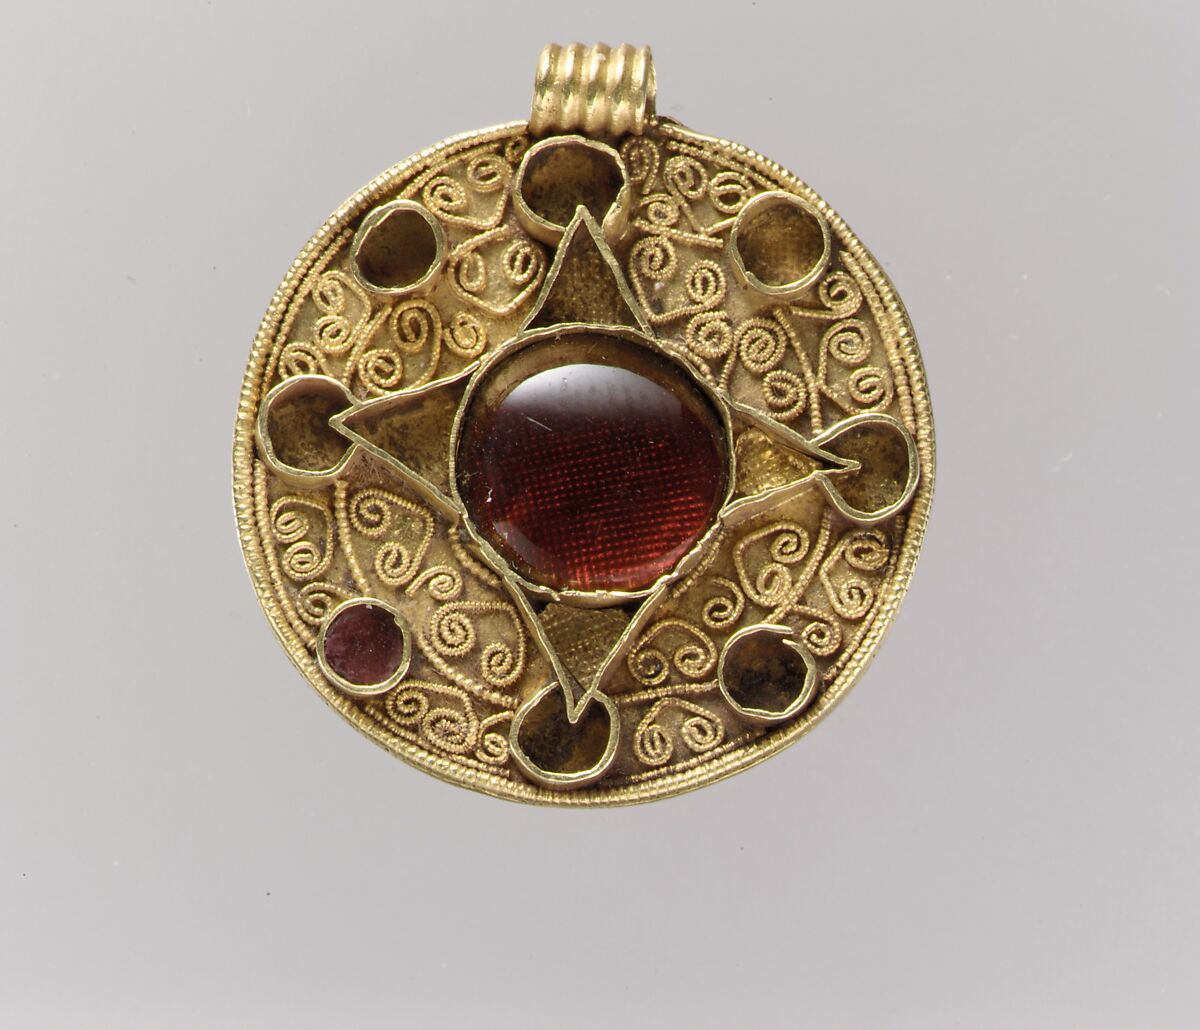 Pendant, Gold, garnets with patterned foil backings, Anglo-Saxon